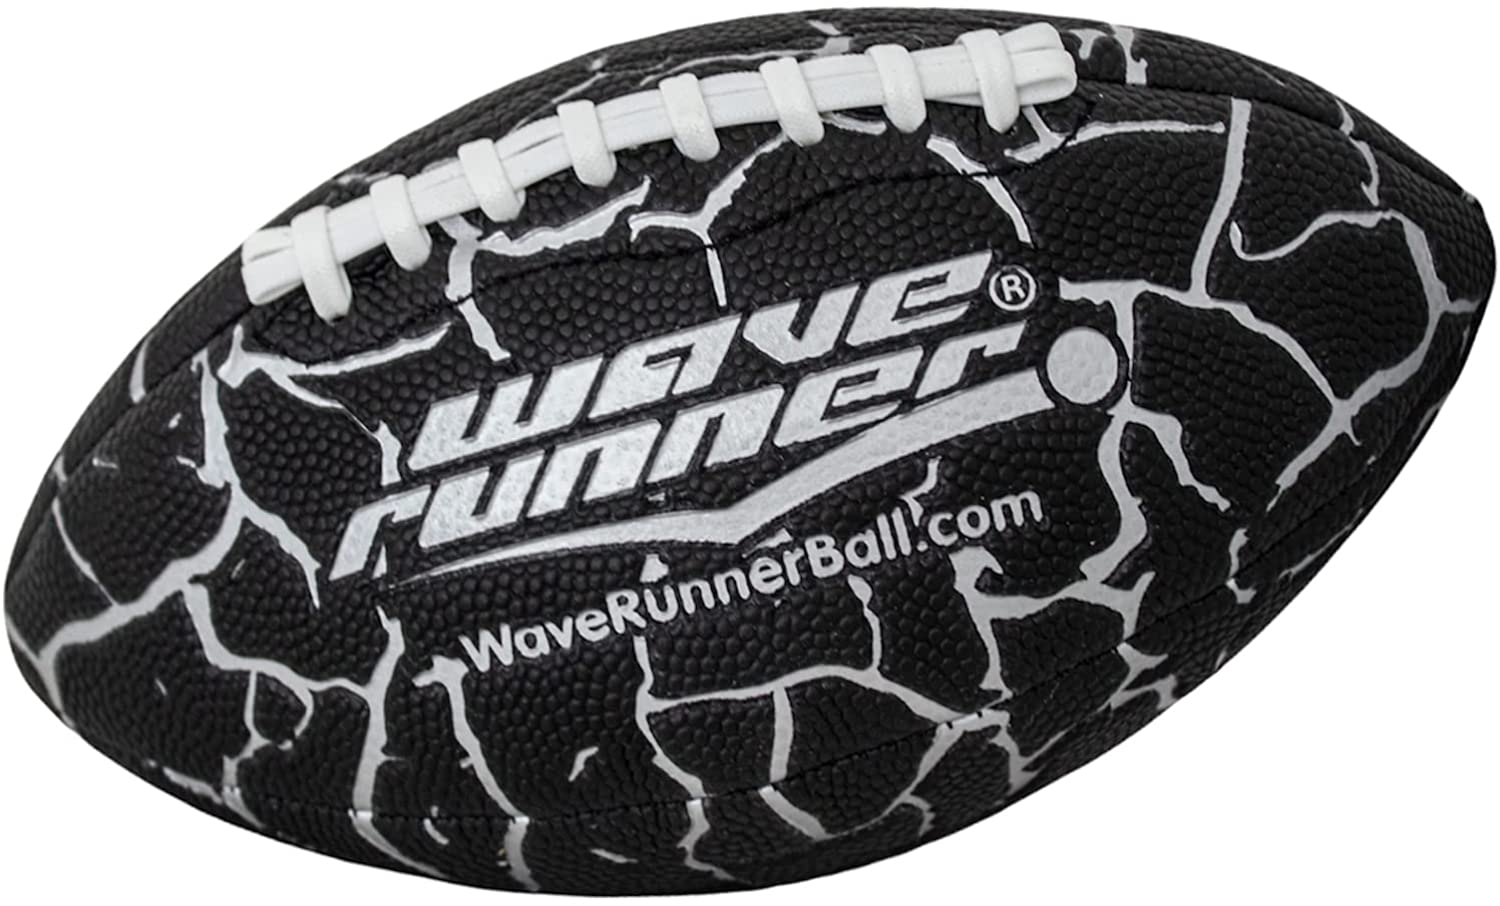 Wave Runner Football Games For Adult Toys , Pool Toys Float Trip Accessories Outdoor Games Water Toys / Beach Toys For Your Kids Beach Toys , Beach Stuff Ball Games 9.25in - image 1 of 8